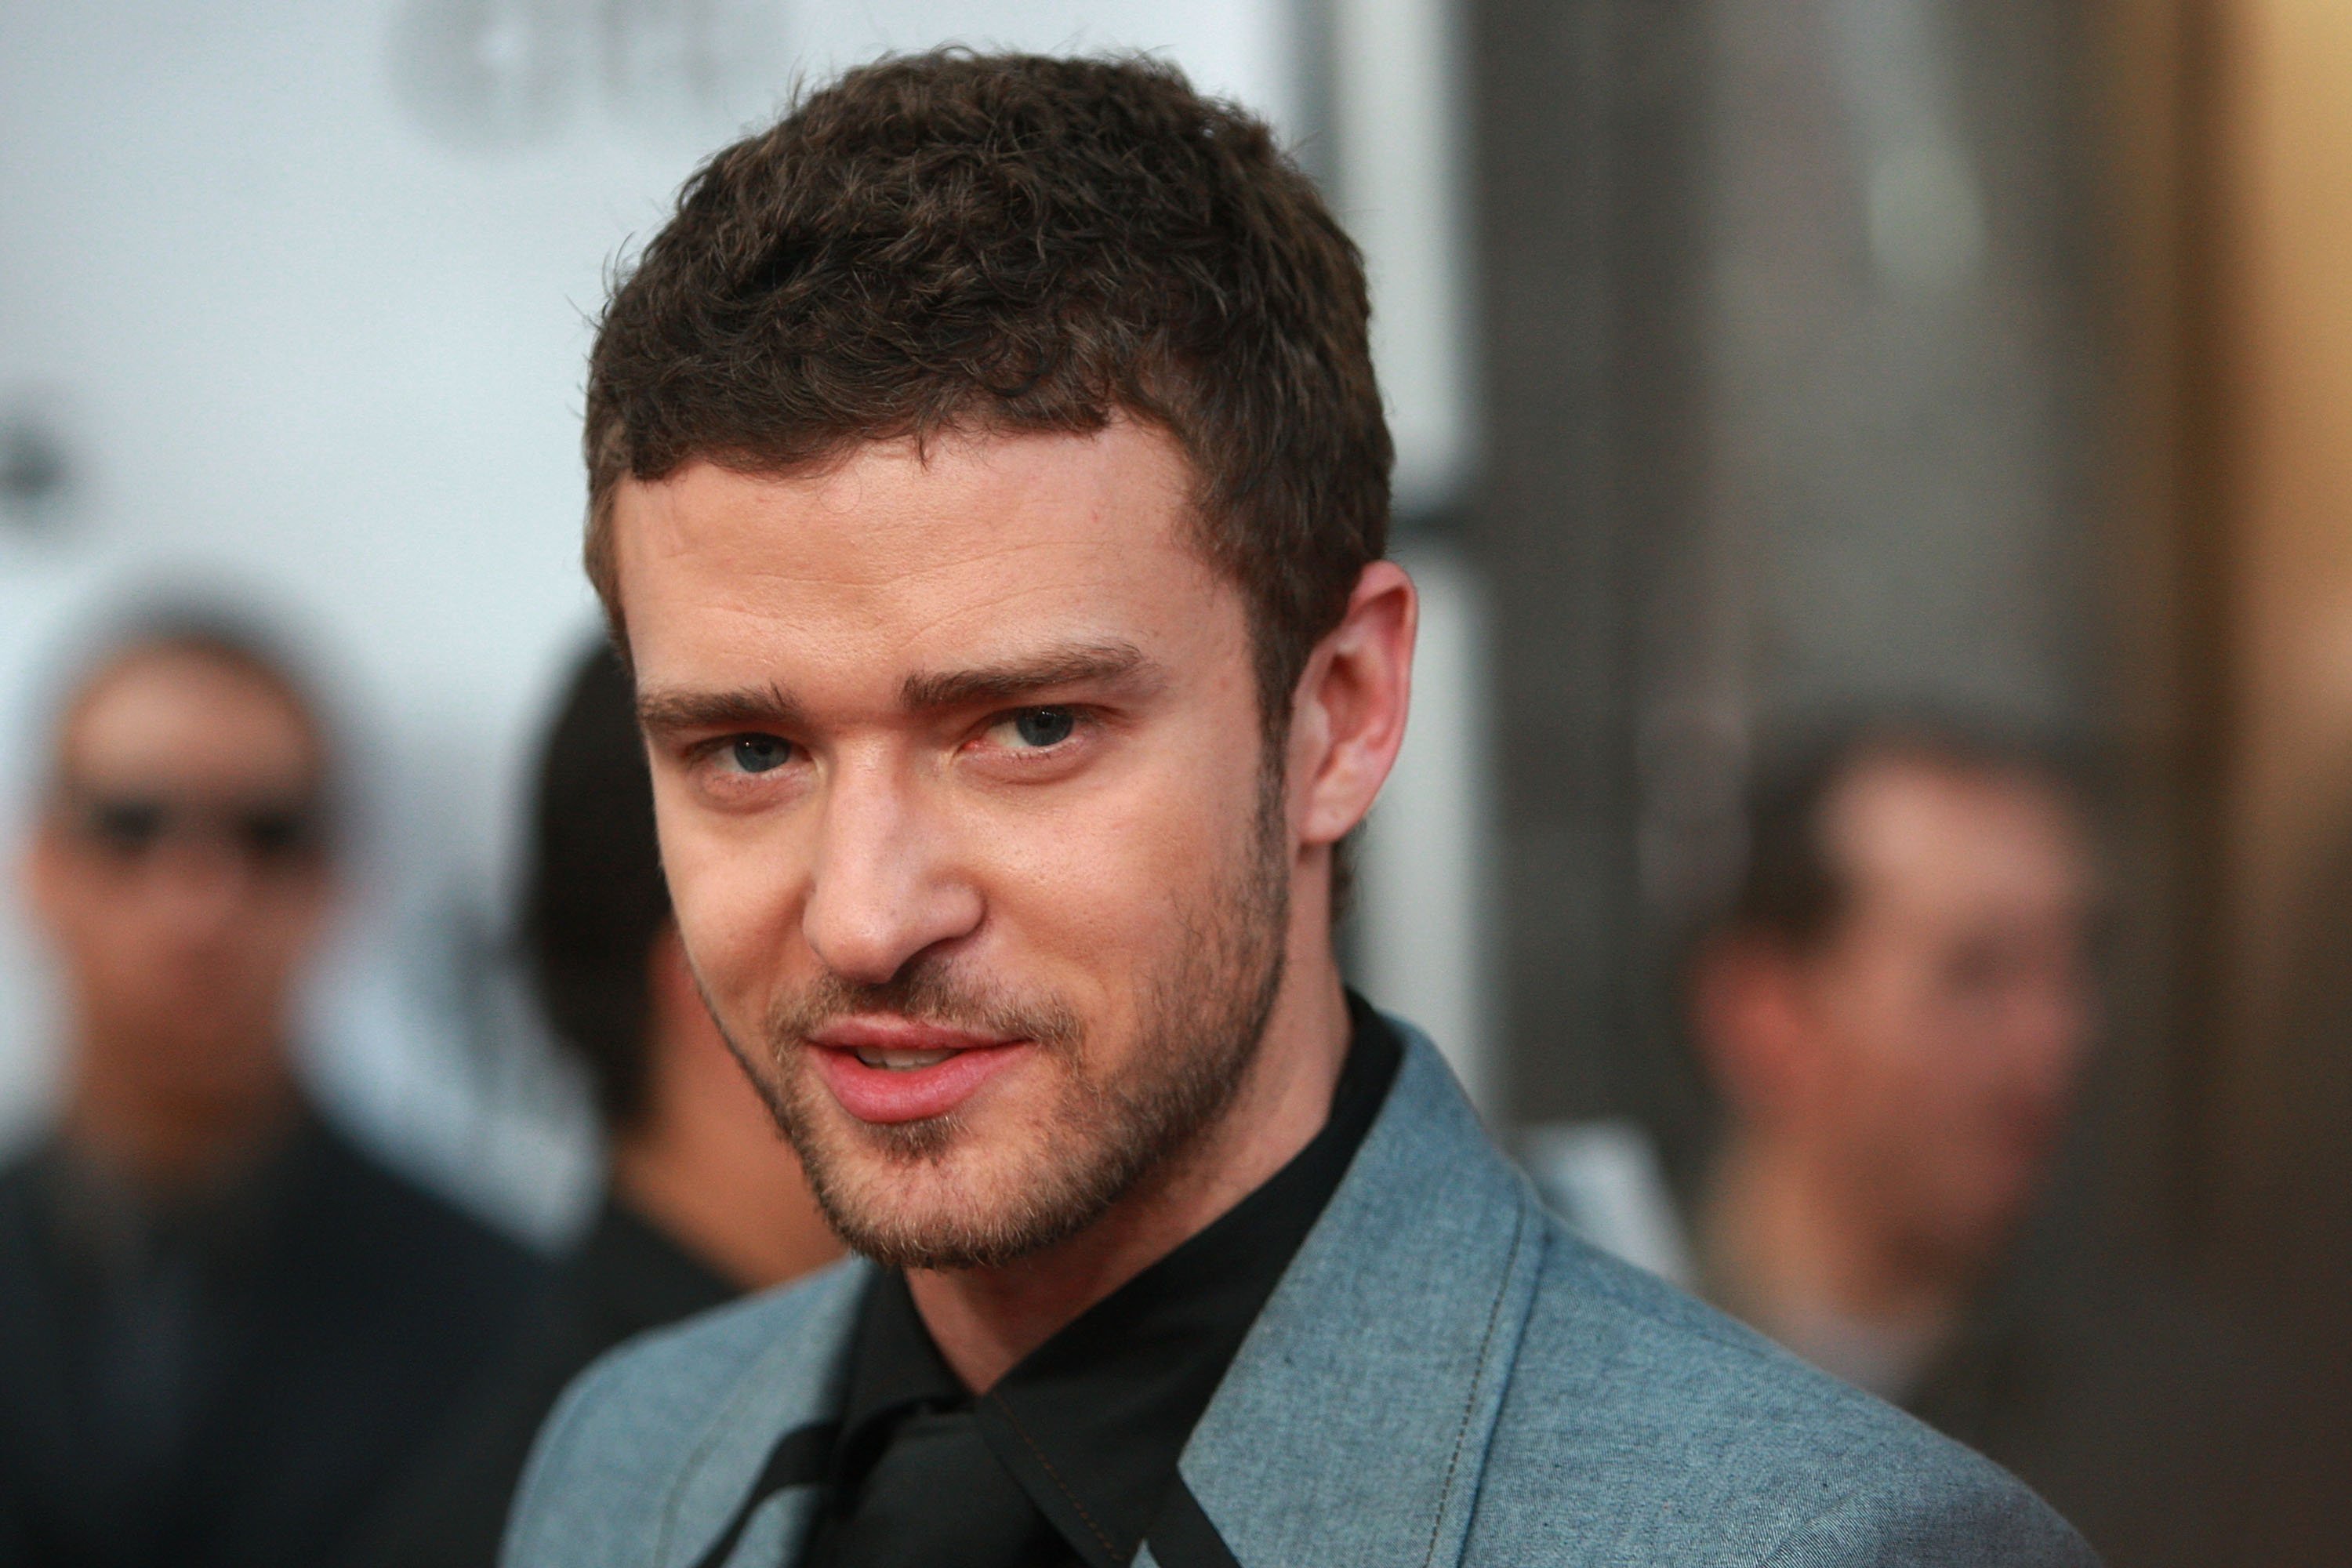 Justin Timberlake smiles for a photo while attending a fashion show